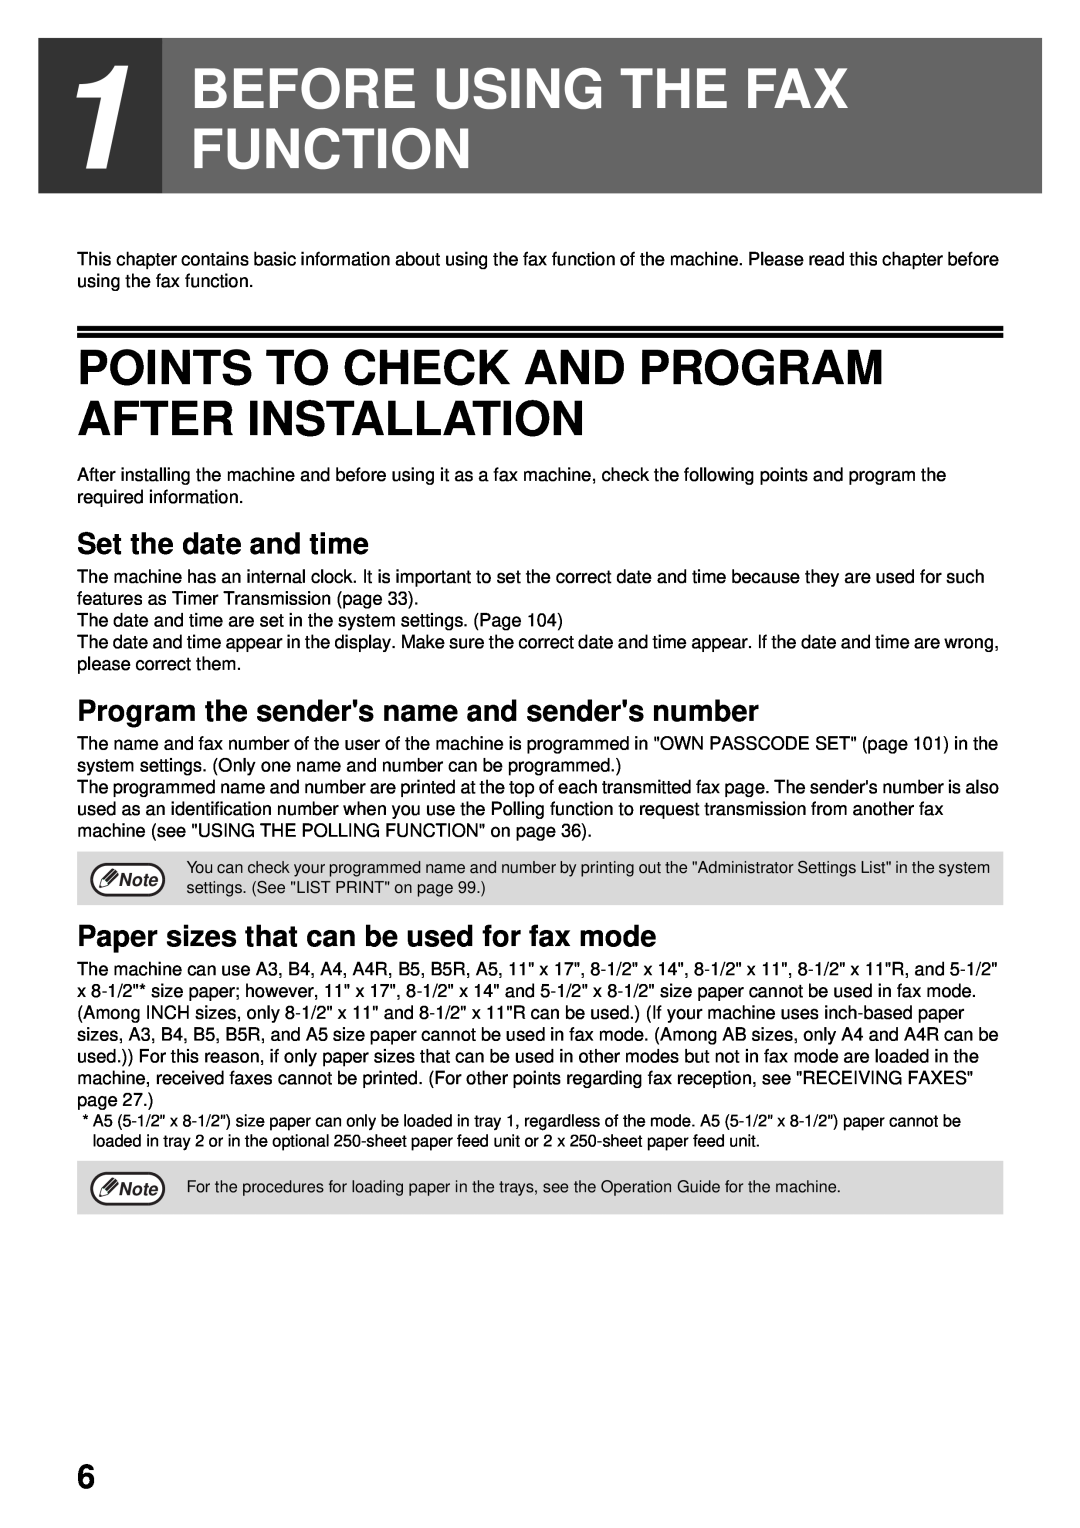 Sharp MX-FX13 appendix Before Using The Fax Function, Points To Check And Program After Installation, Set the date and time 